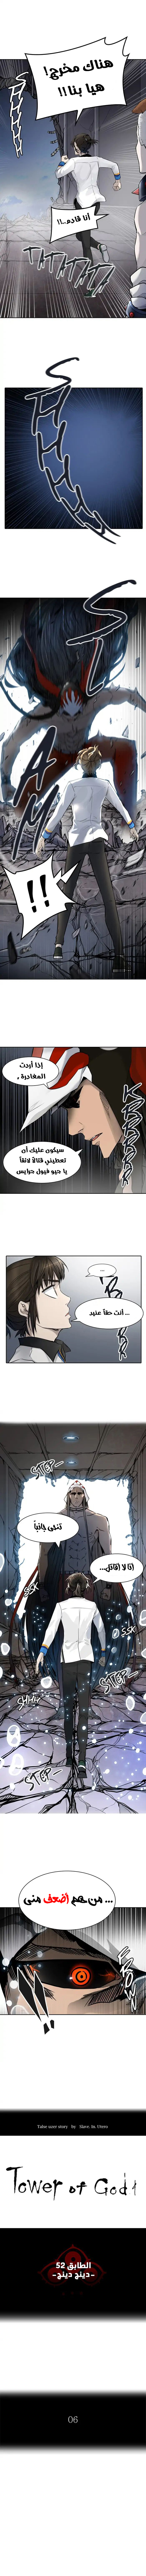 Tower of God S3: Chapter 7 - Page 1